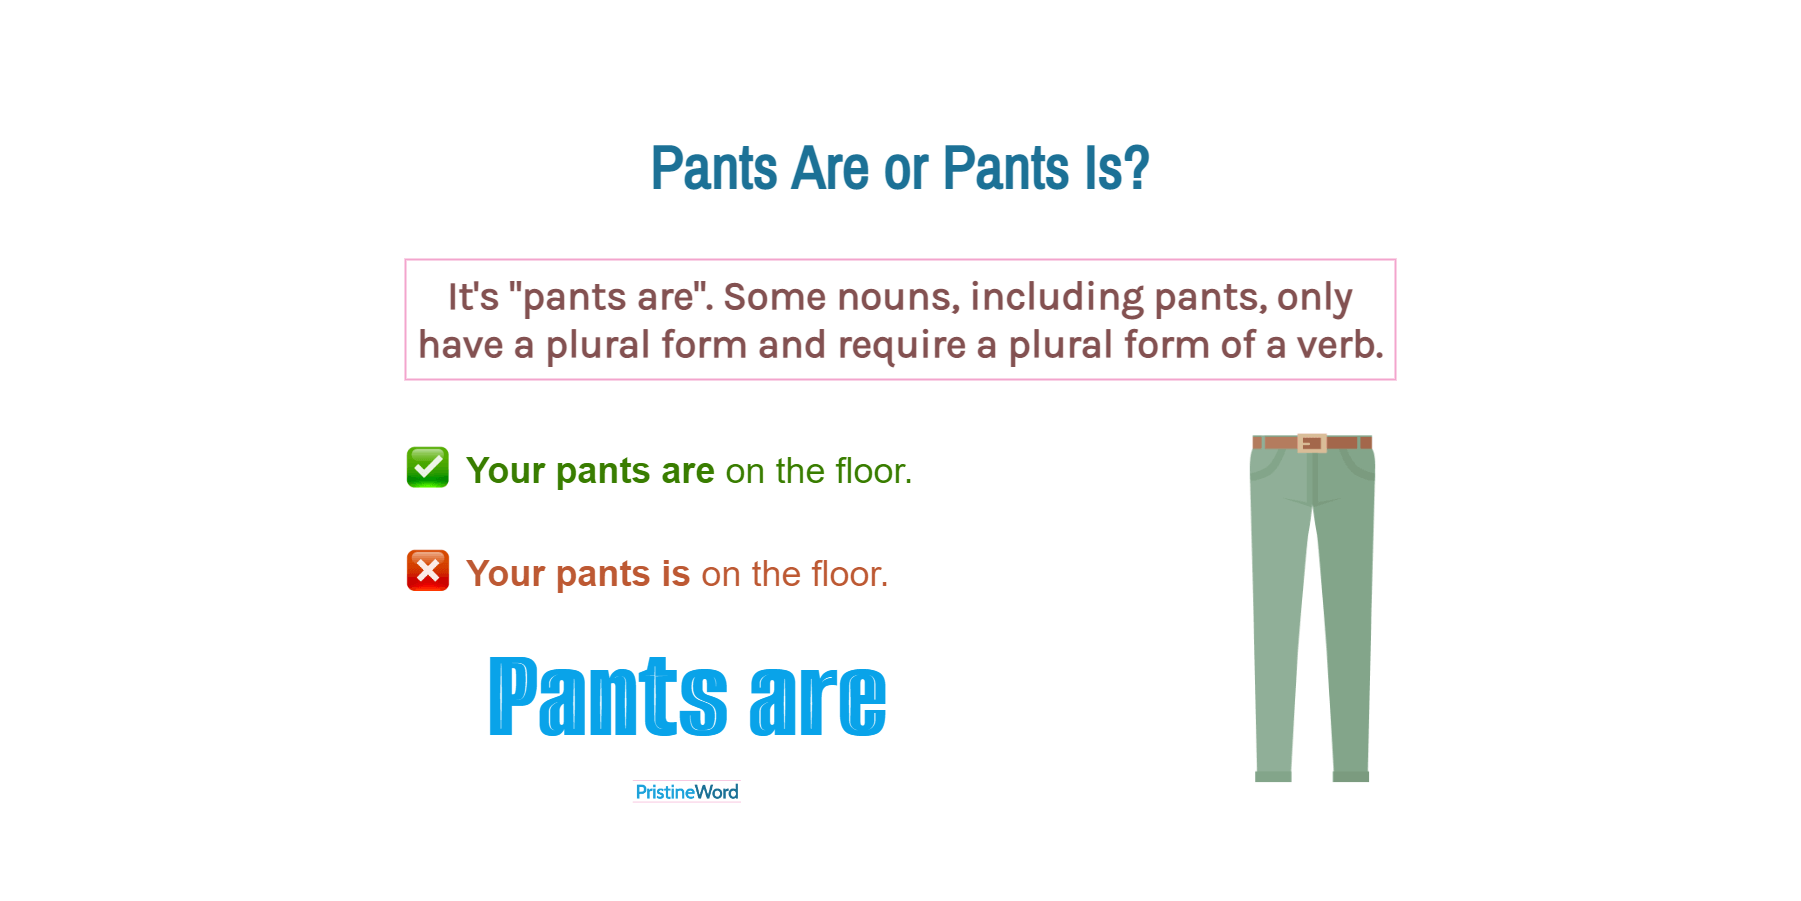 Pants Are Or Pants Is. Which Is Correct?